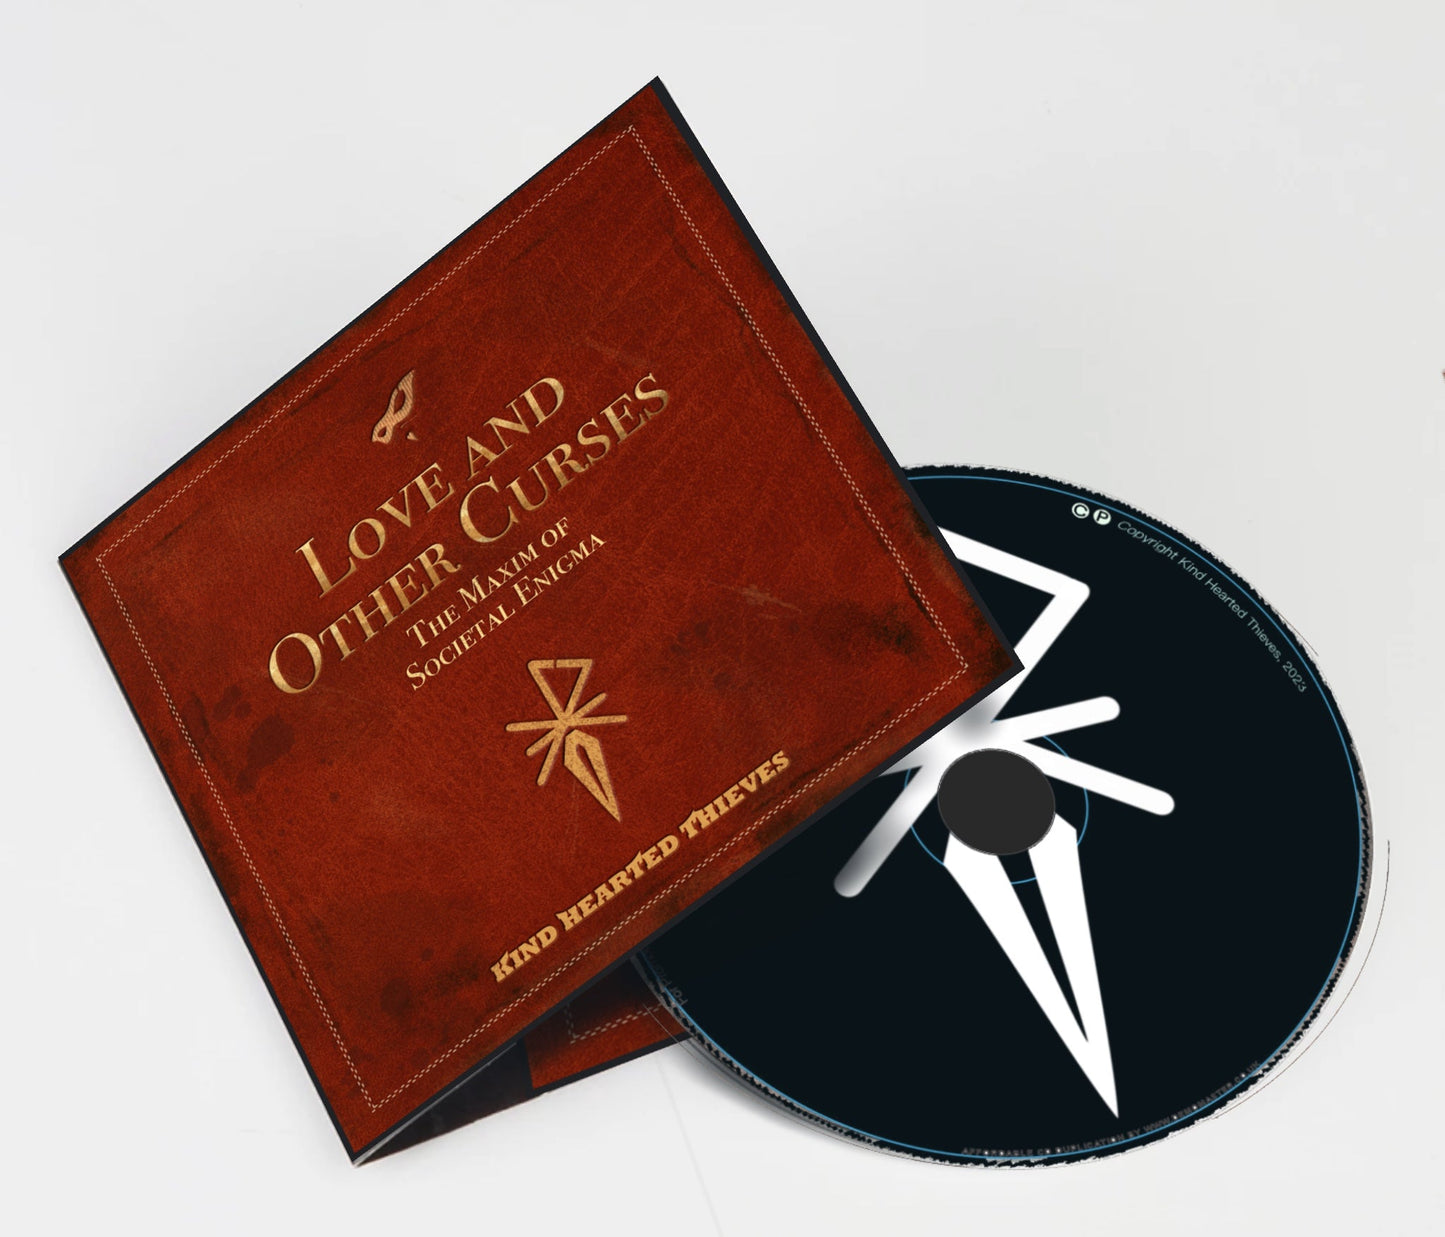 [FREE SIGNED CD] 'Love And Other Curses: The Maxim Of Societal Enigma'